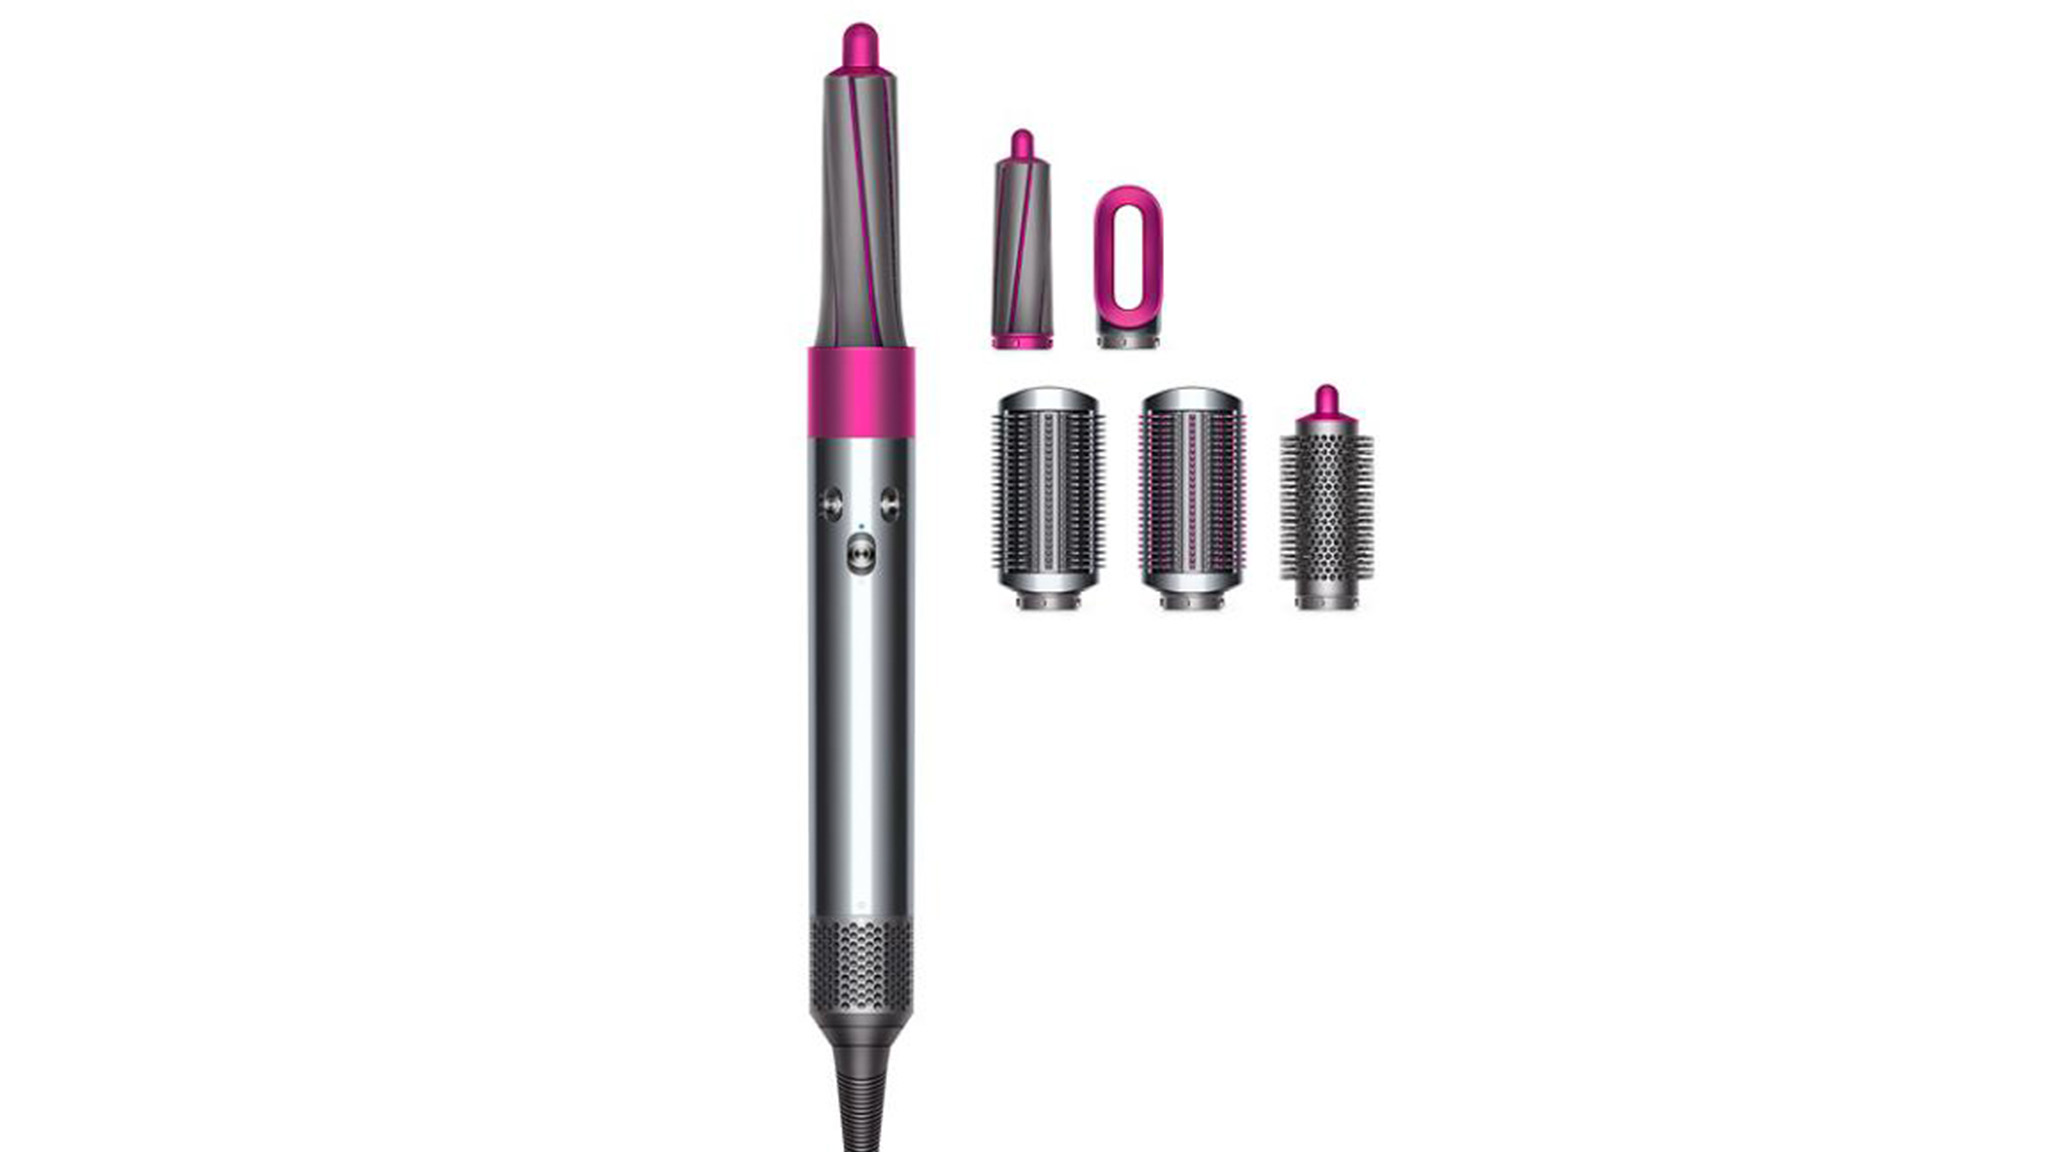 Best curling irons: An image showing the Dyson Airwrap Styler with accessories